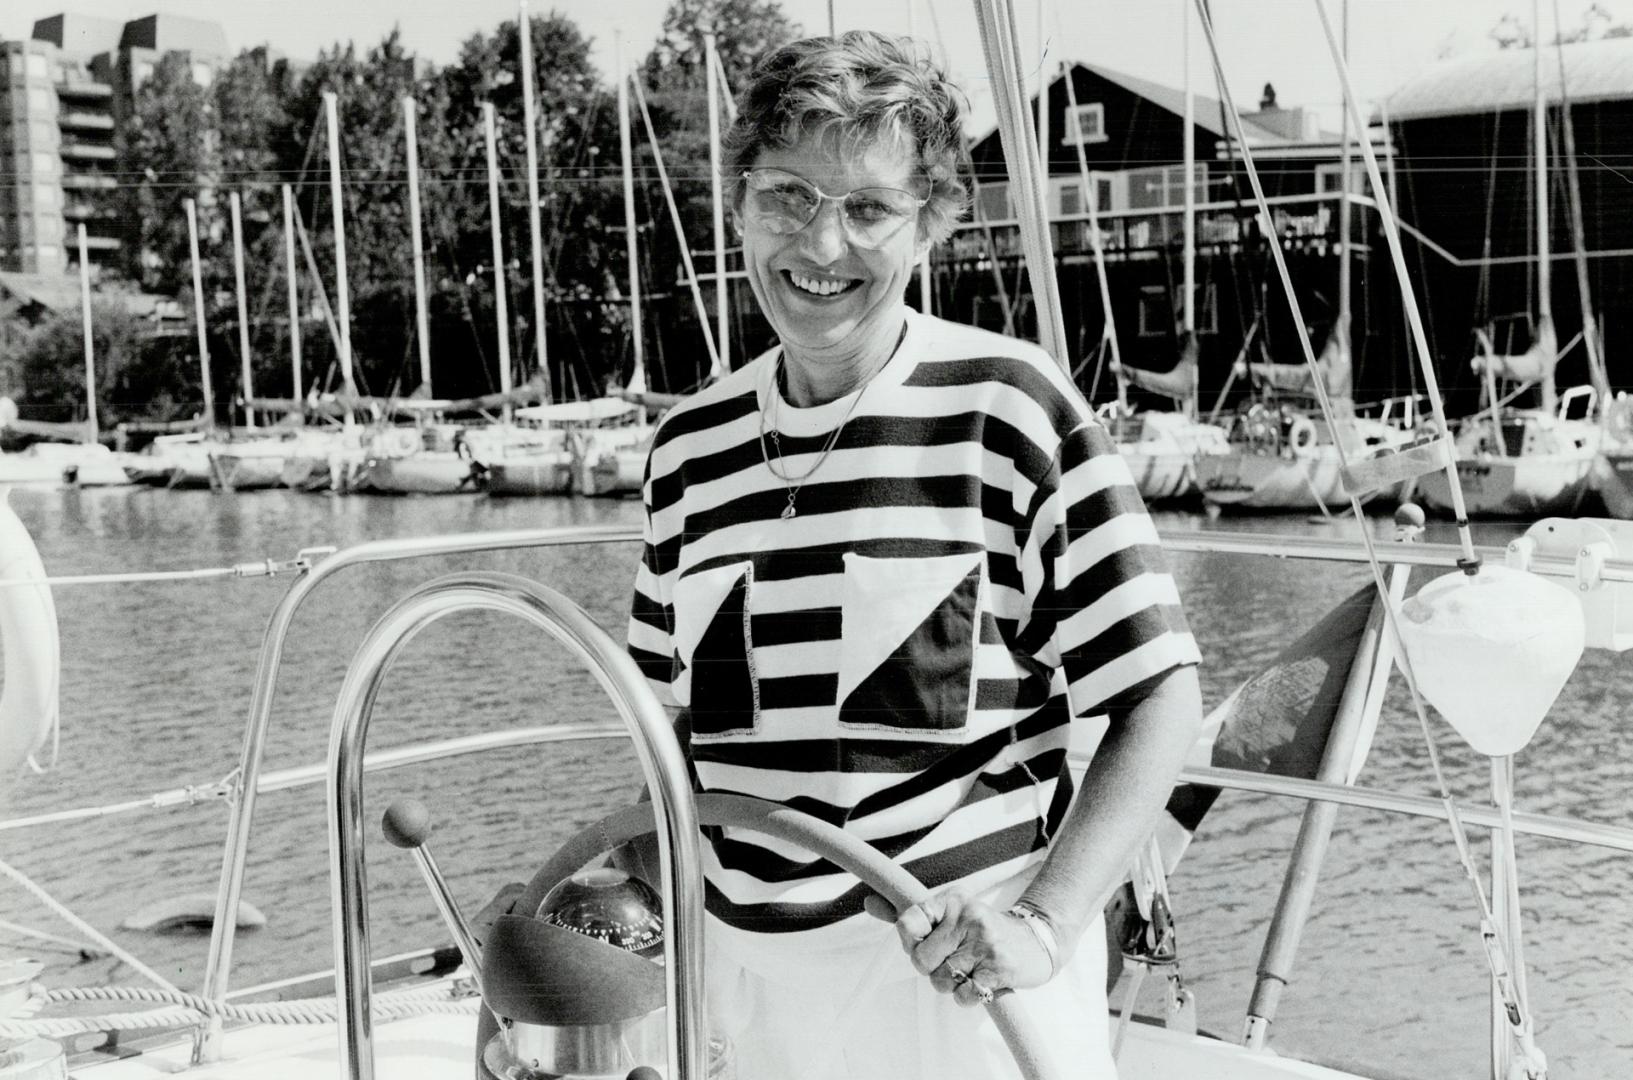 Lady commodores, the first in Ontario, are running to yacht clubs this year: Hilda Stewart, above, at the Oakville Yacht Squadron, and Marjorie Hare at Toronto's National Yacht Club